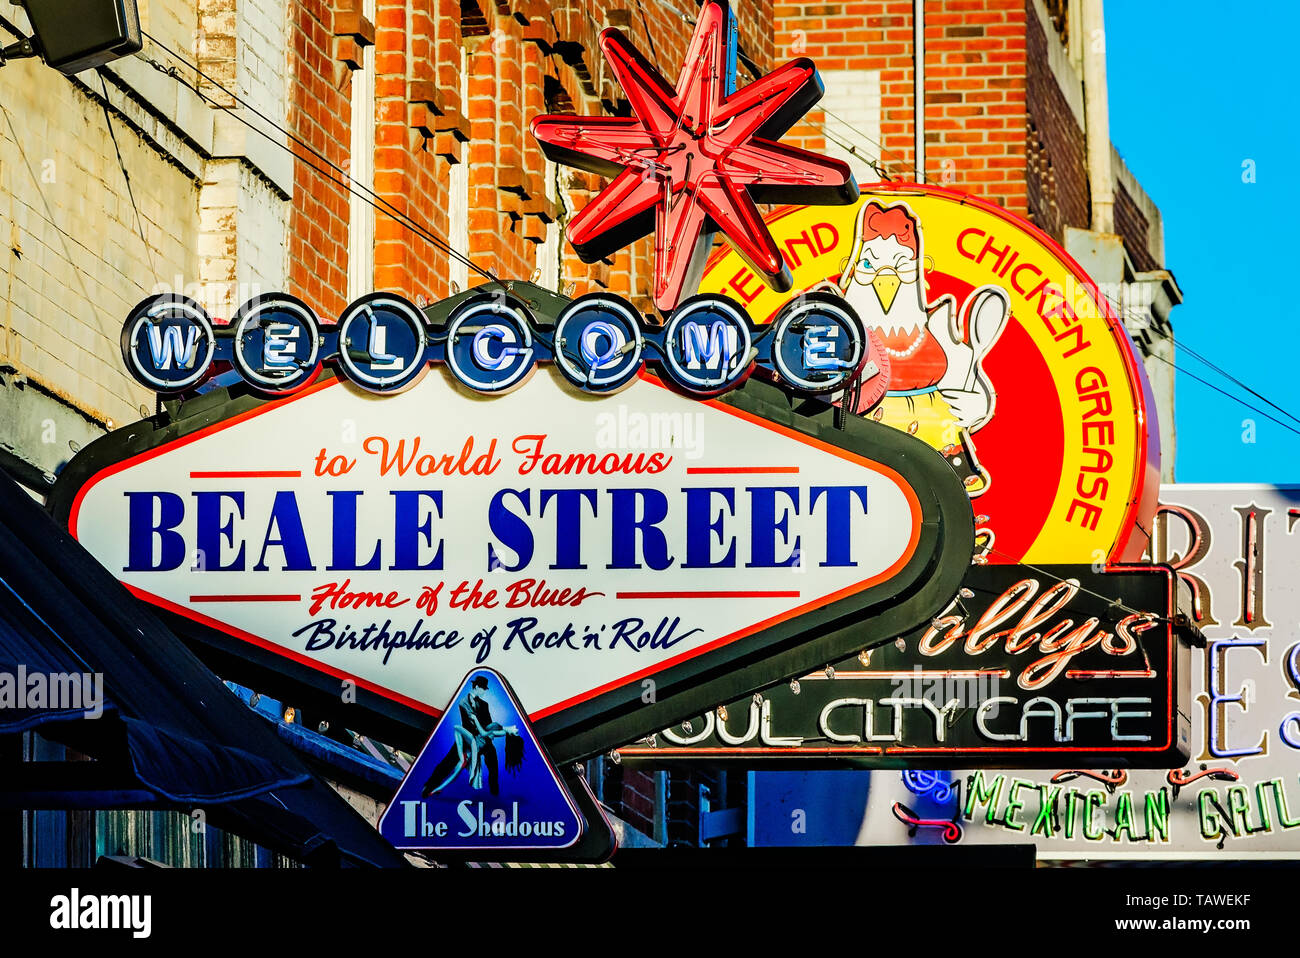 A welcome sign advertises Beale Street, Sept. 12, 2015, in Memphis, Tennessee. Stock Photo